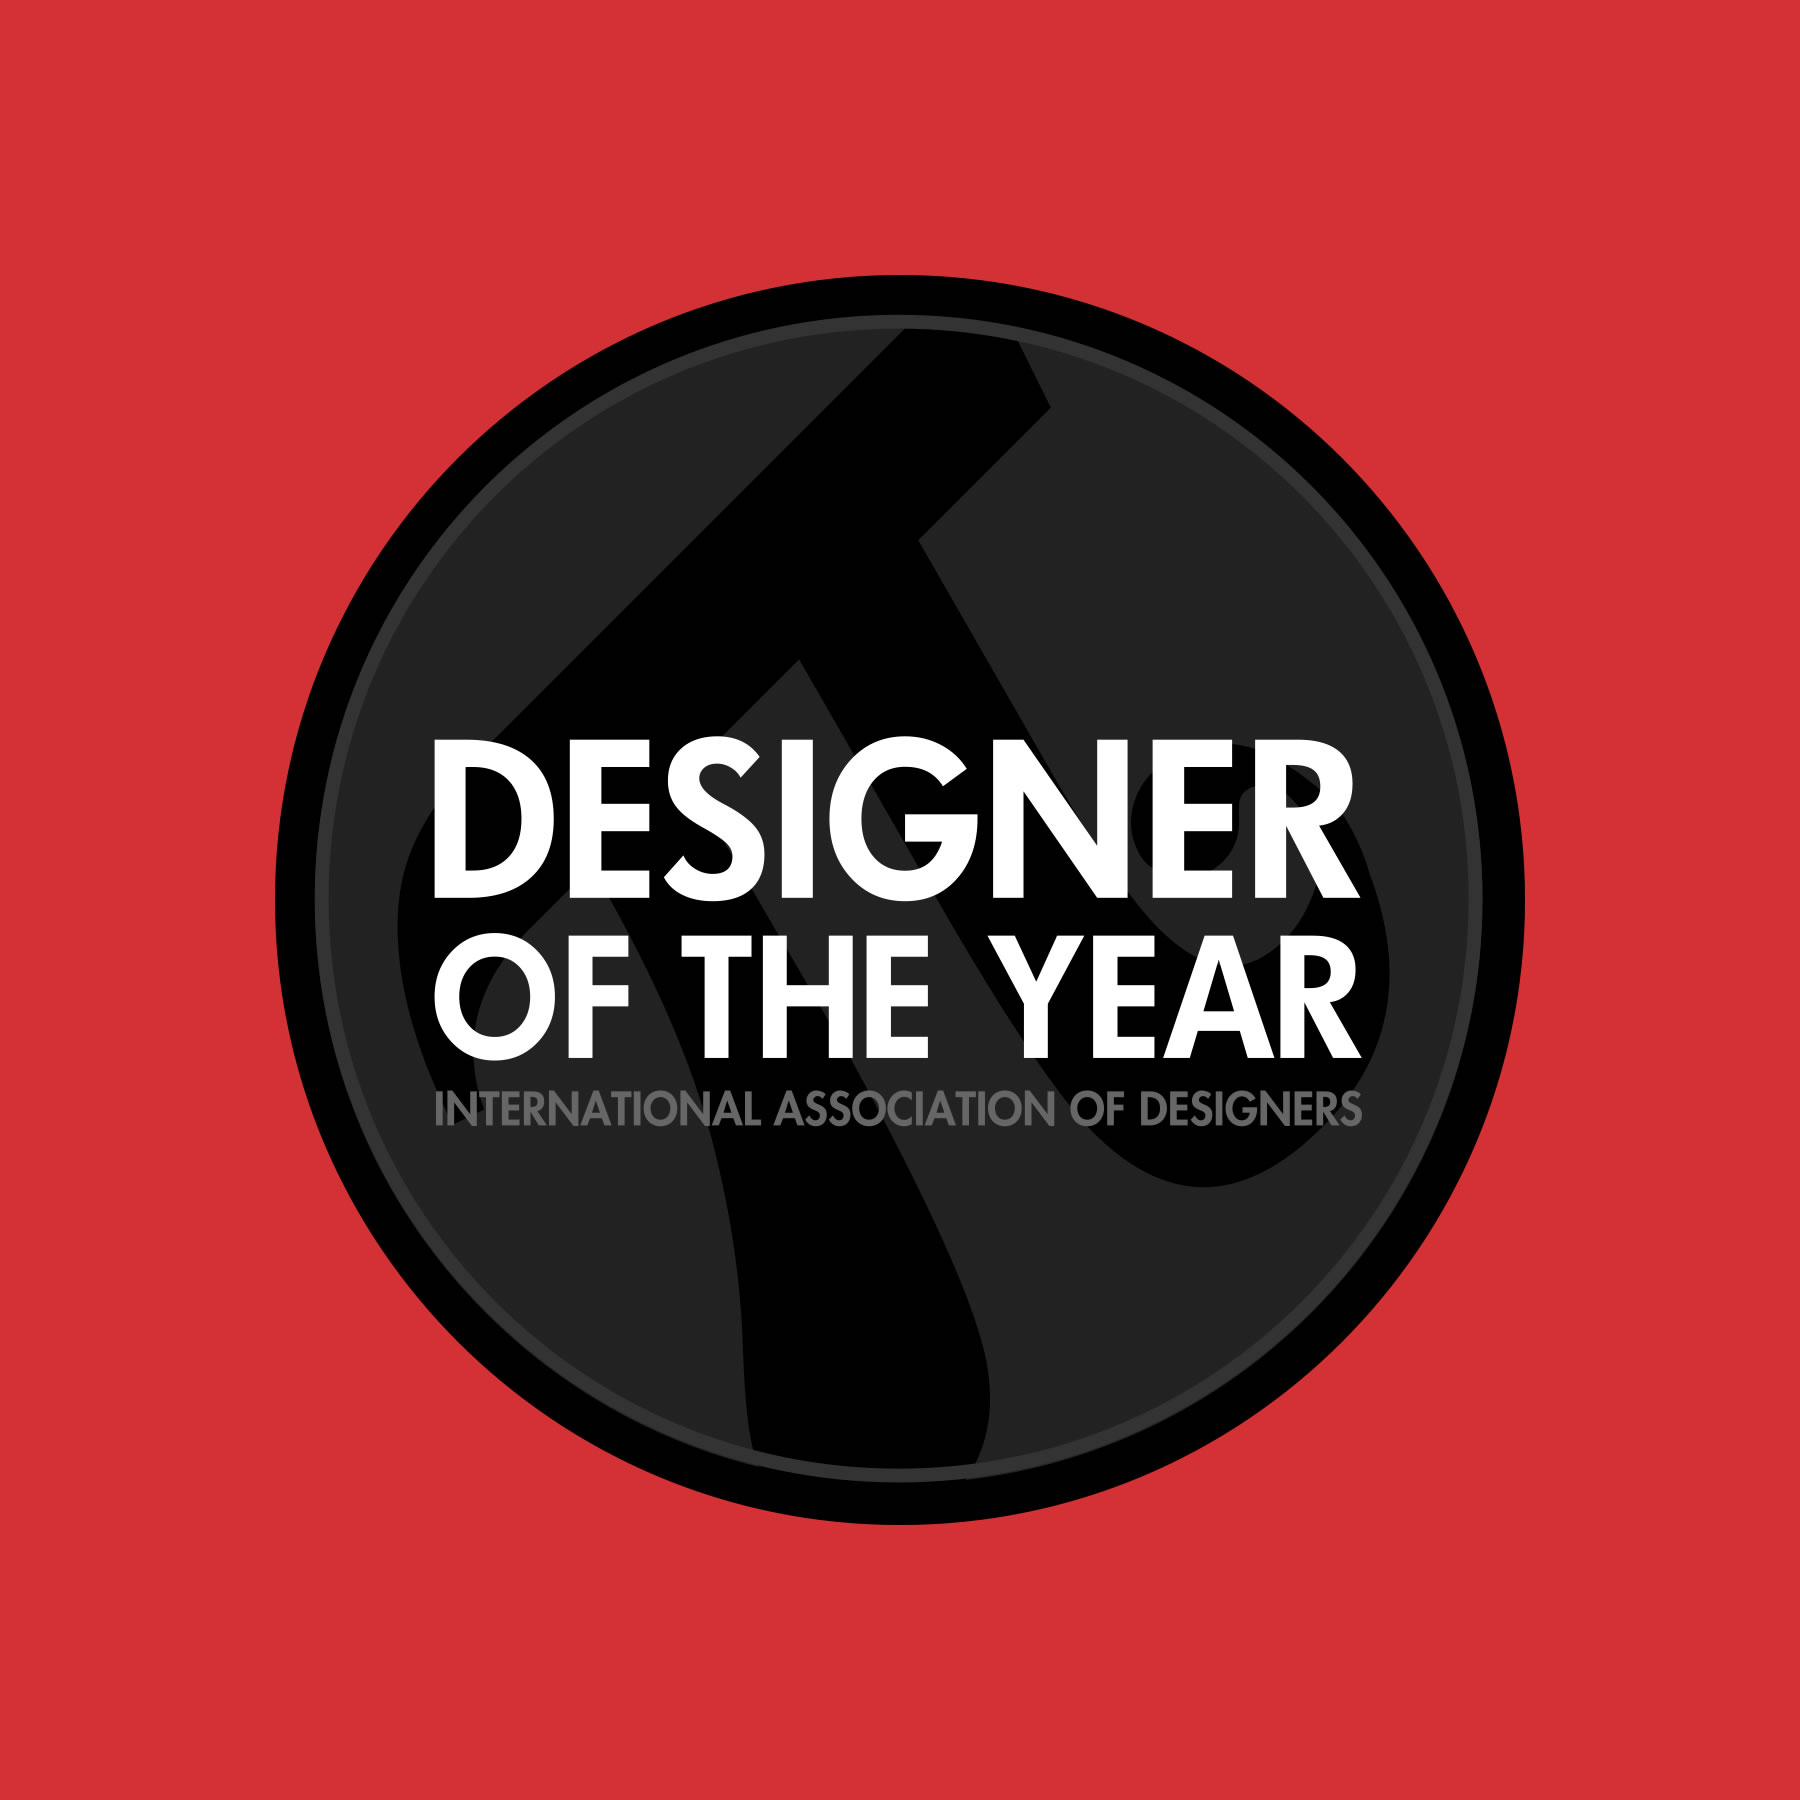 Designer of the Year Logo on red background